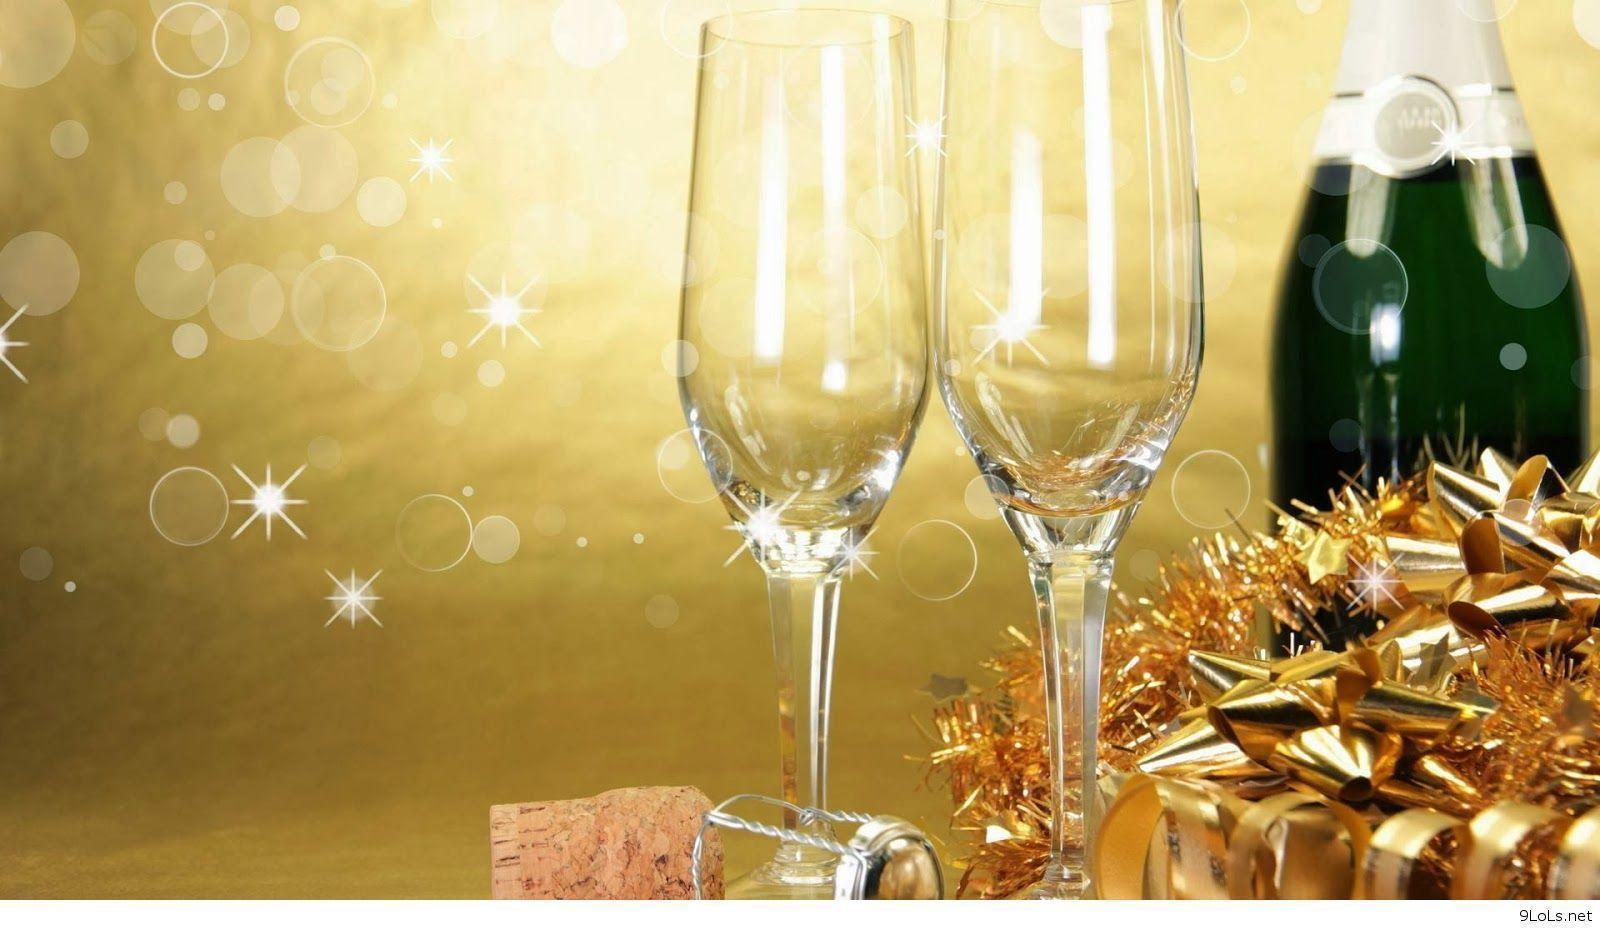 New Year&;s Eve celebration wallpaper with drinks Picture